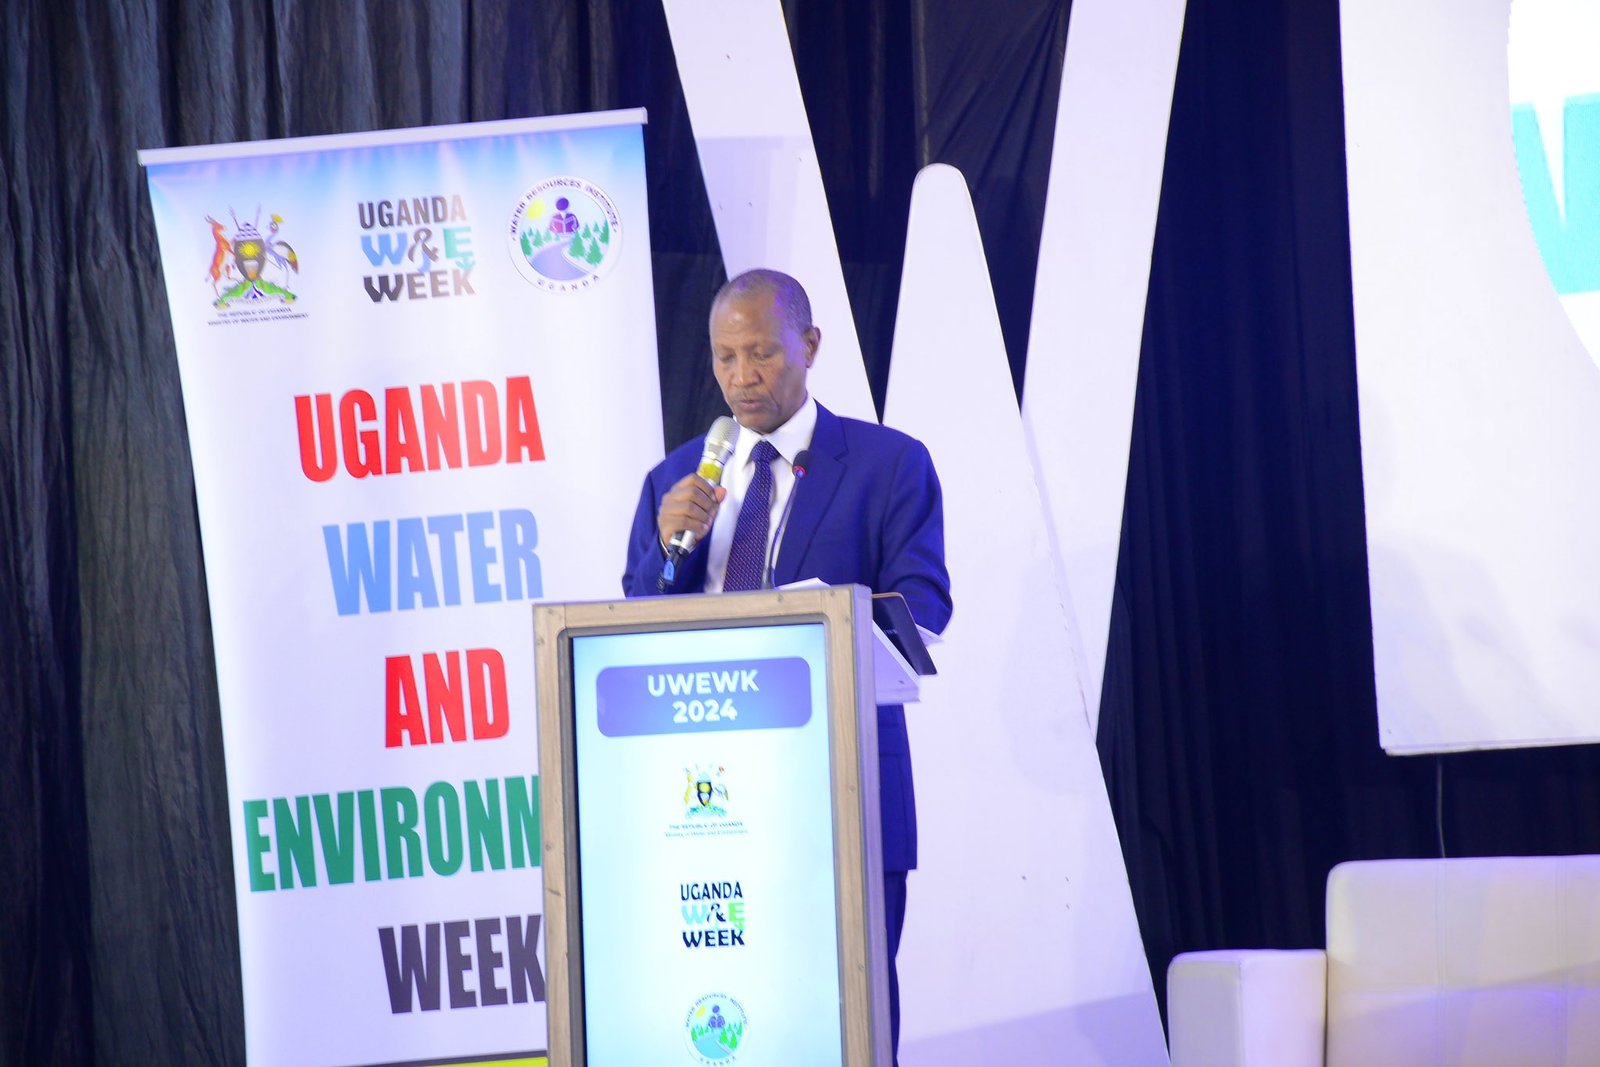 Uganda Water and Environment Week: The right time to Re-think Development Without Depending on Fossil Fuels.